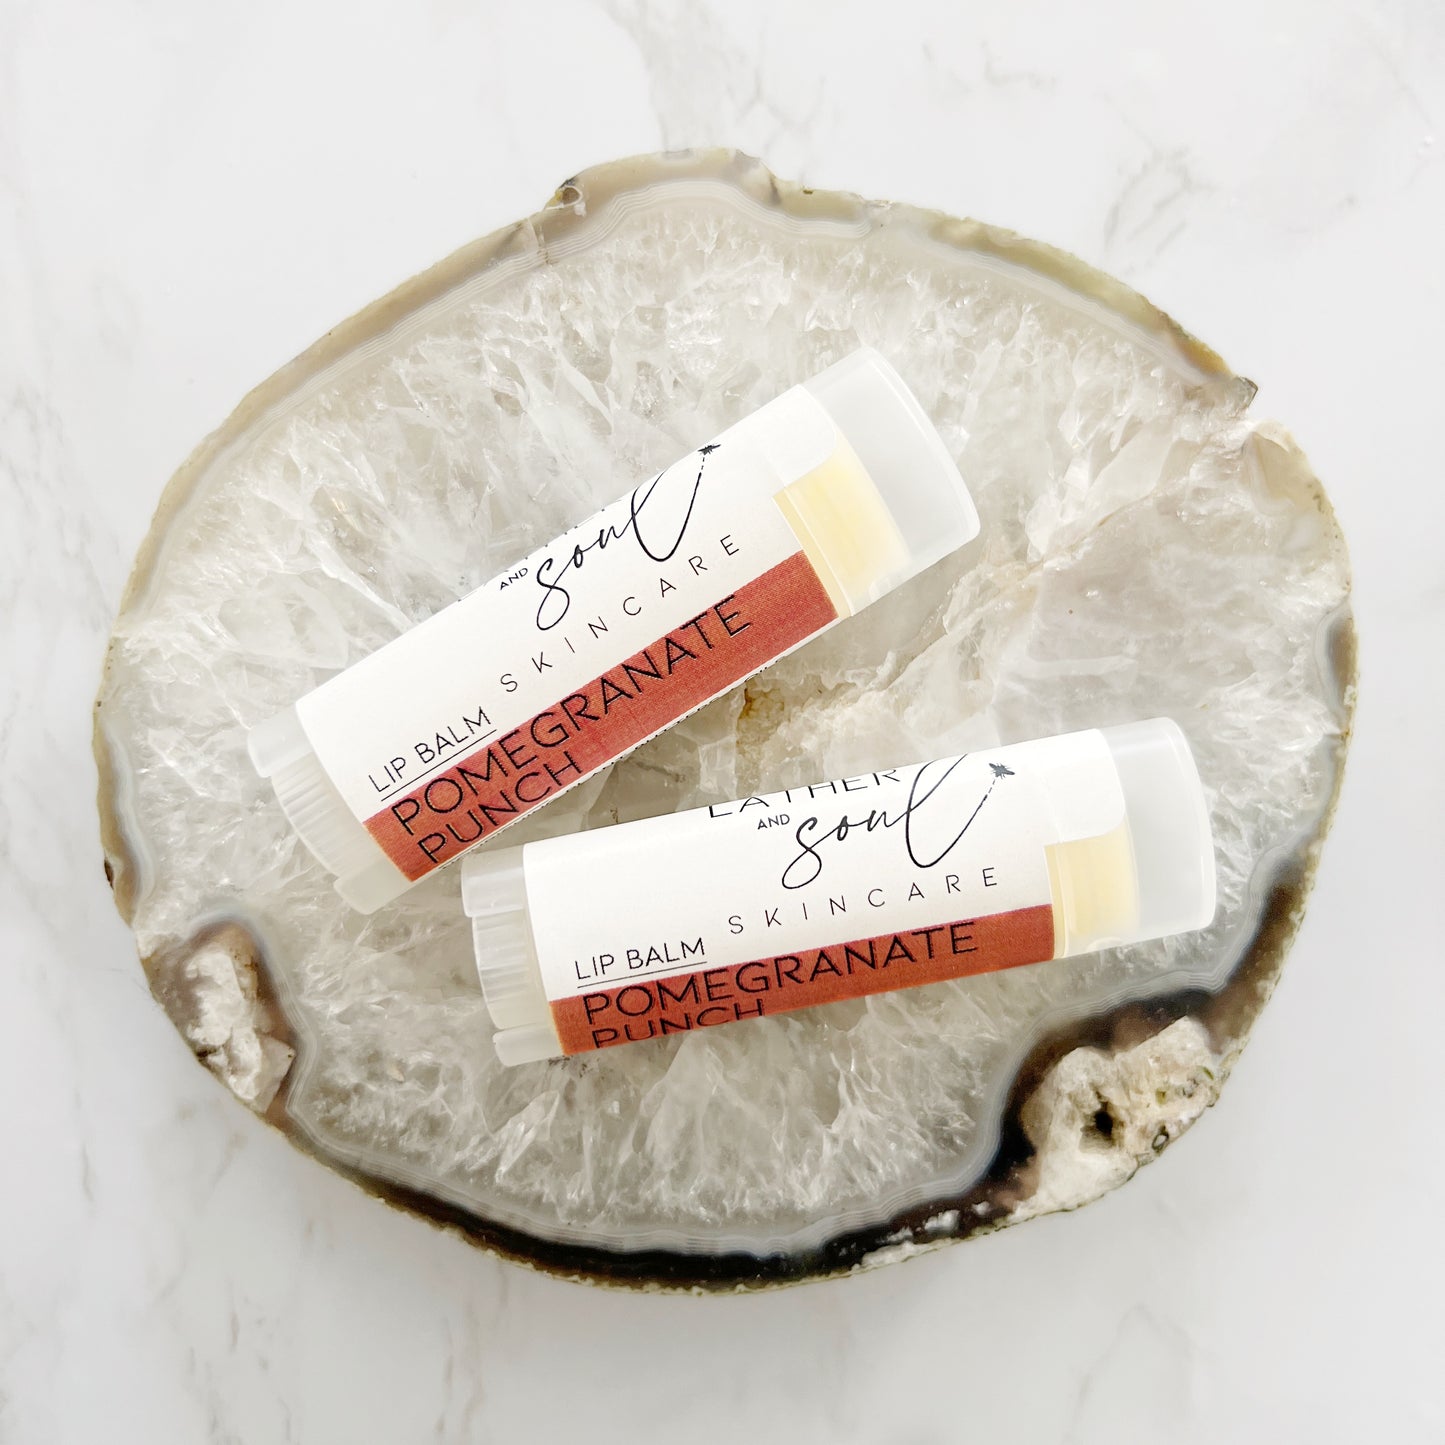 Organic lip balm by Lather + Soul, in pomegranate punch flavor.